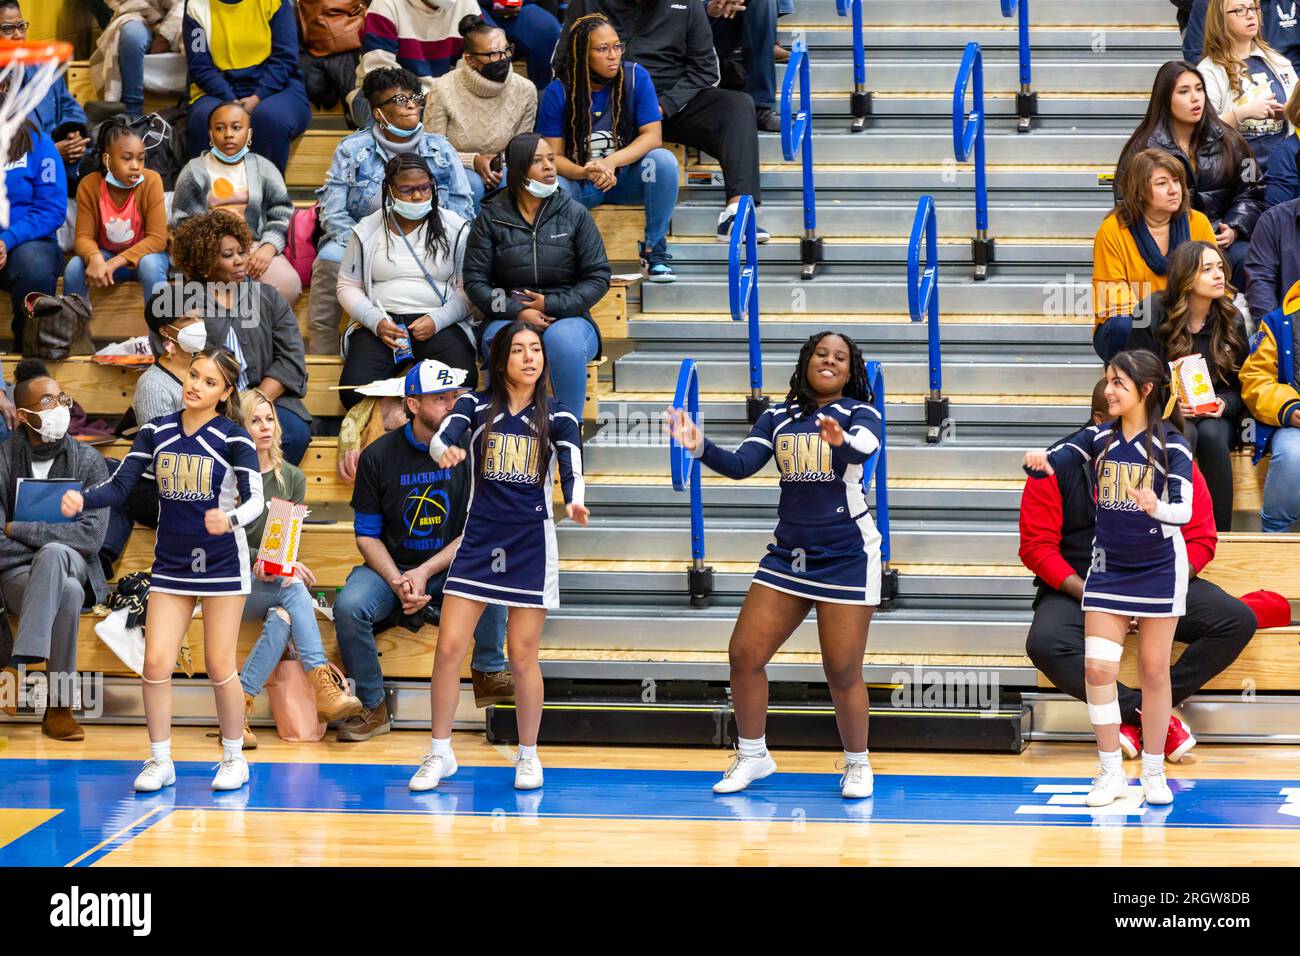 The Hammond Bishop Noll Institute cheerleaders perform during a game at North Judson, Indiana, USA. Stock Photo